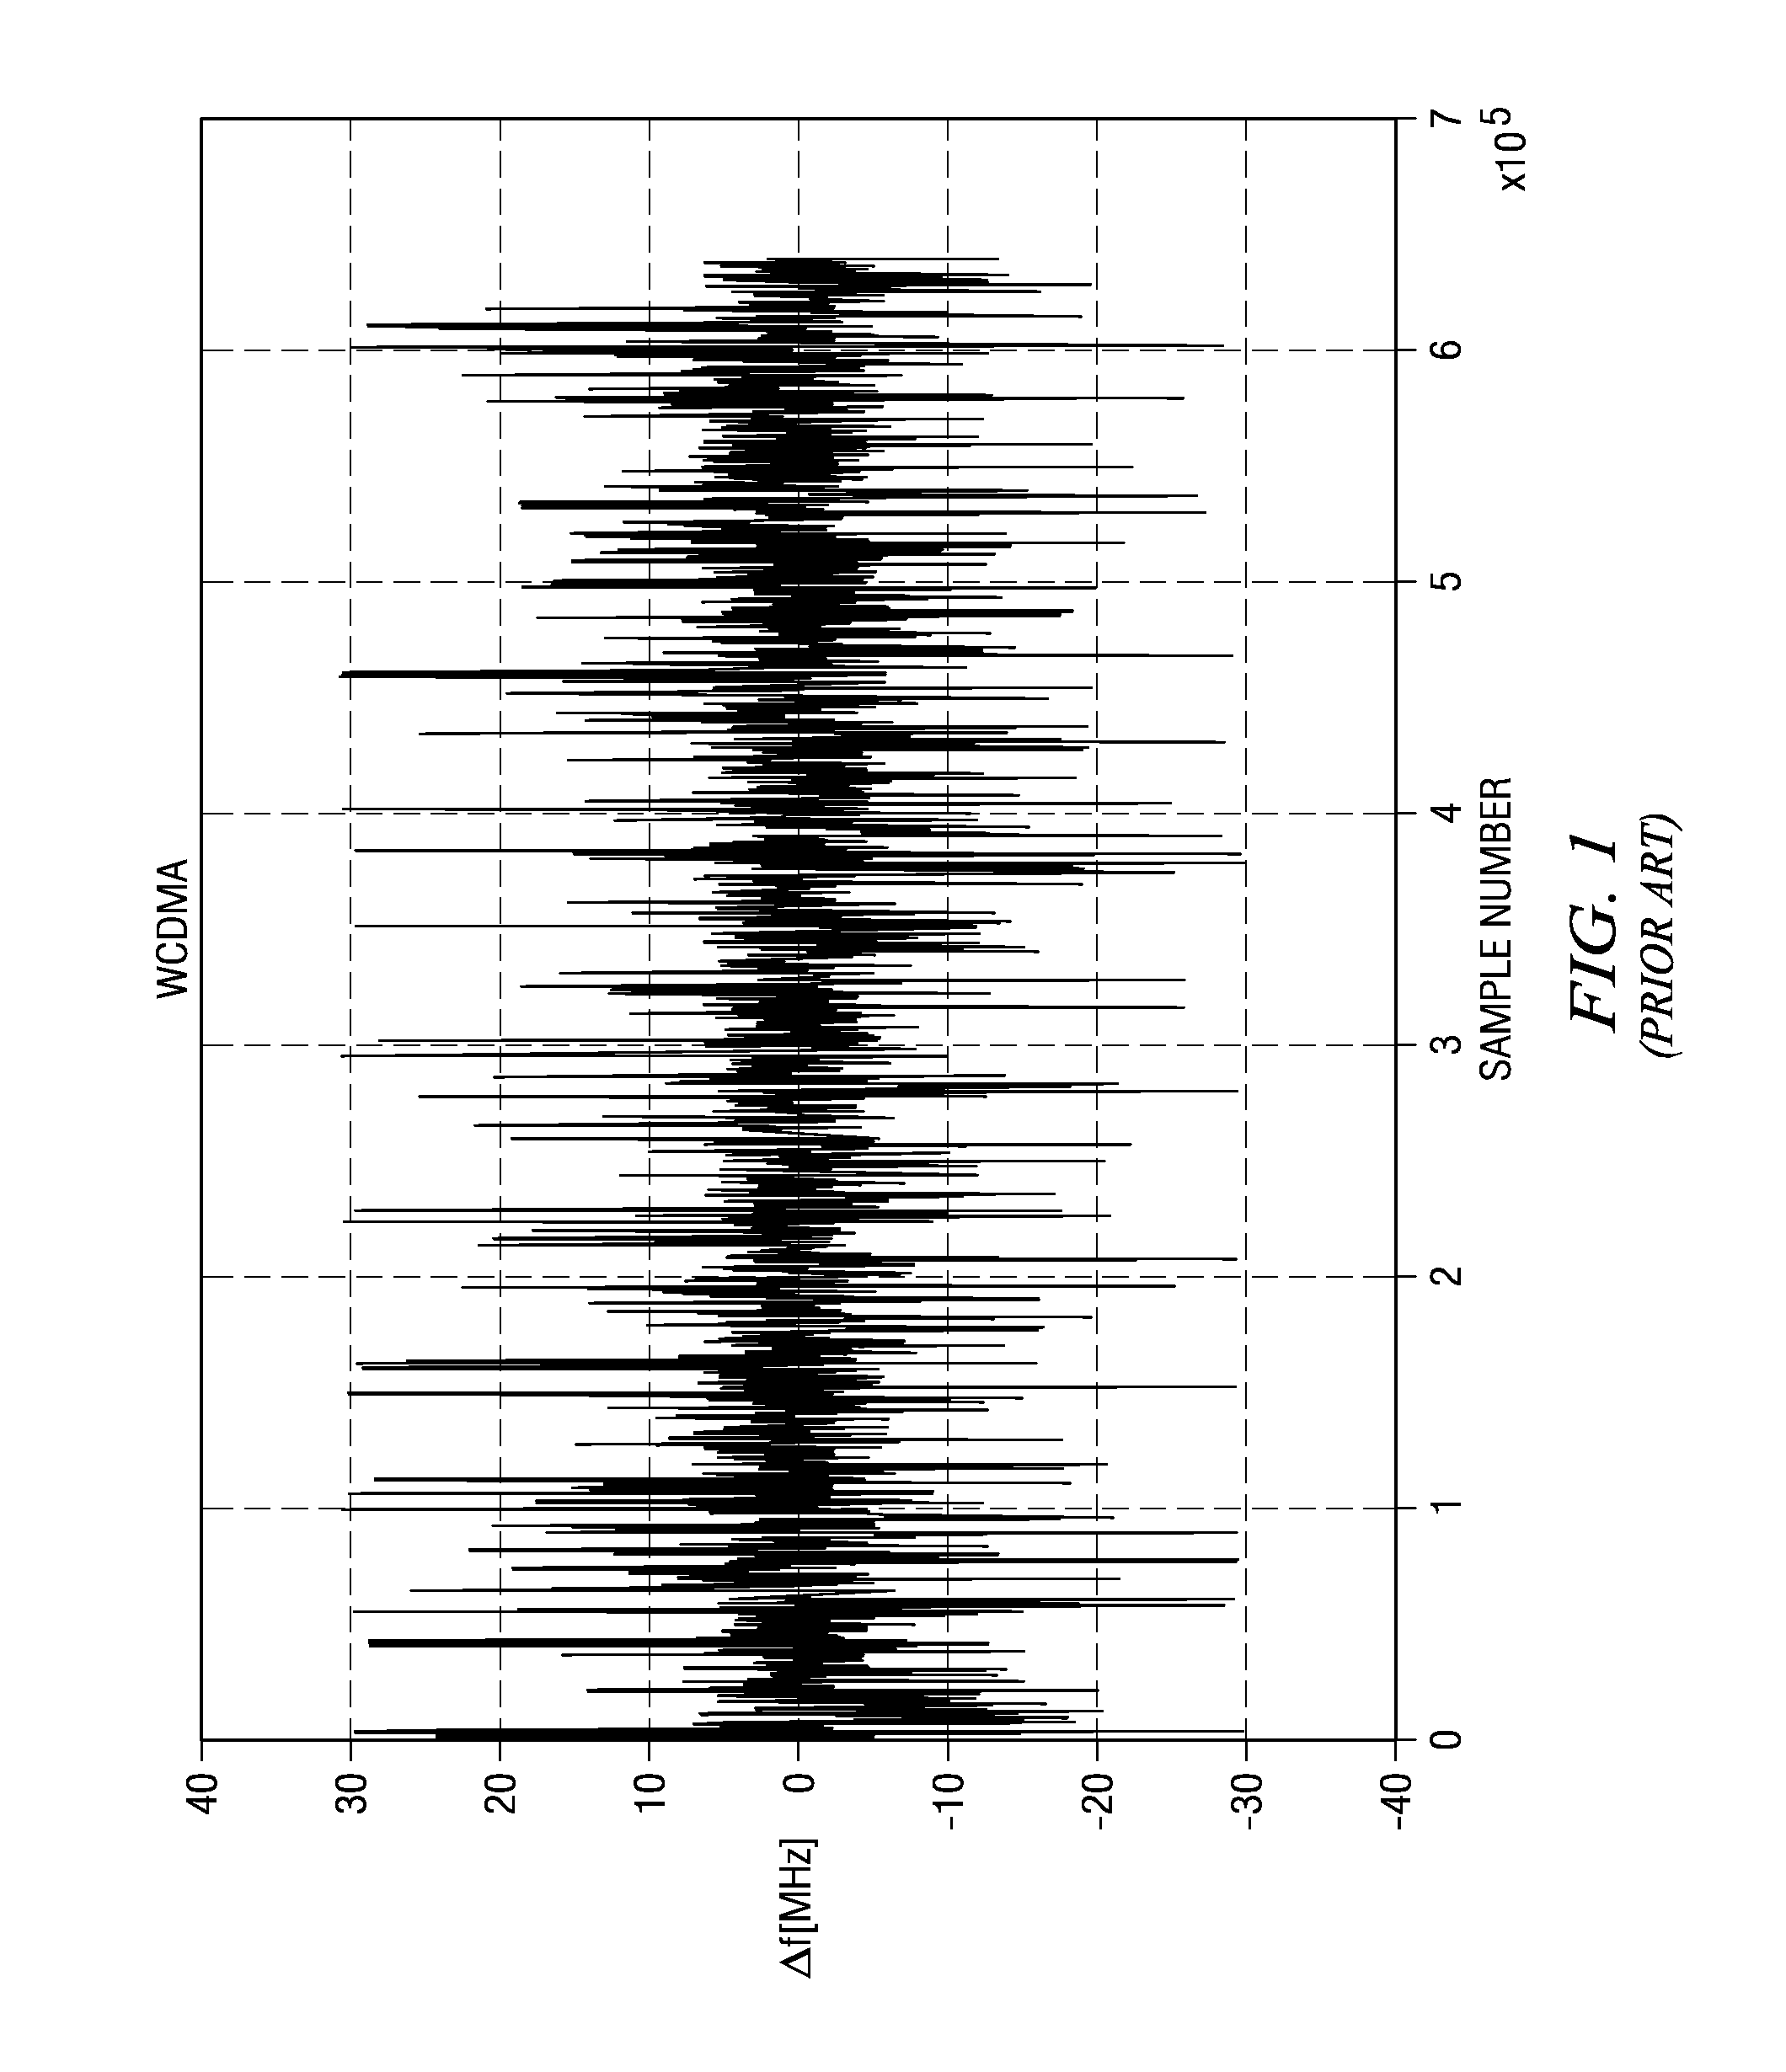 Frequency tuning range extension and modulation resolution enhancement of a digitally controlled oscillator